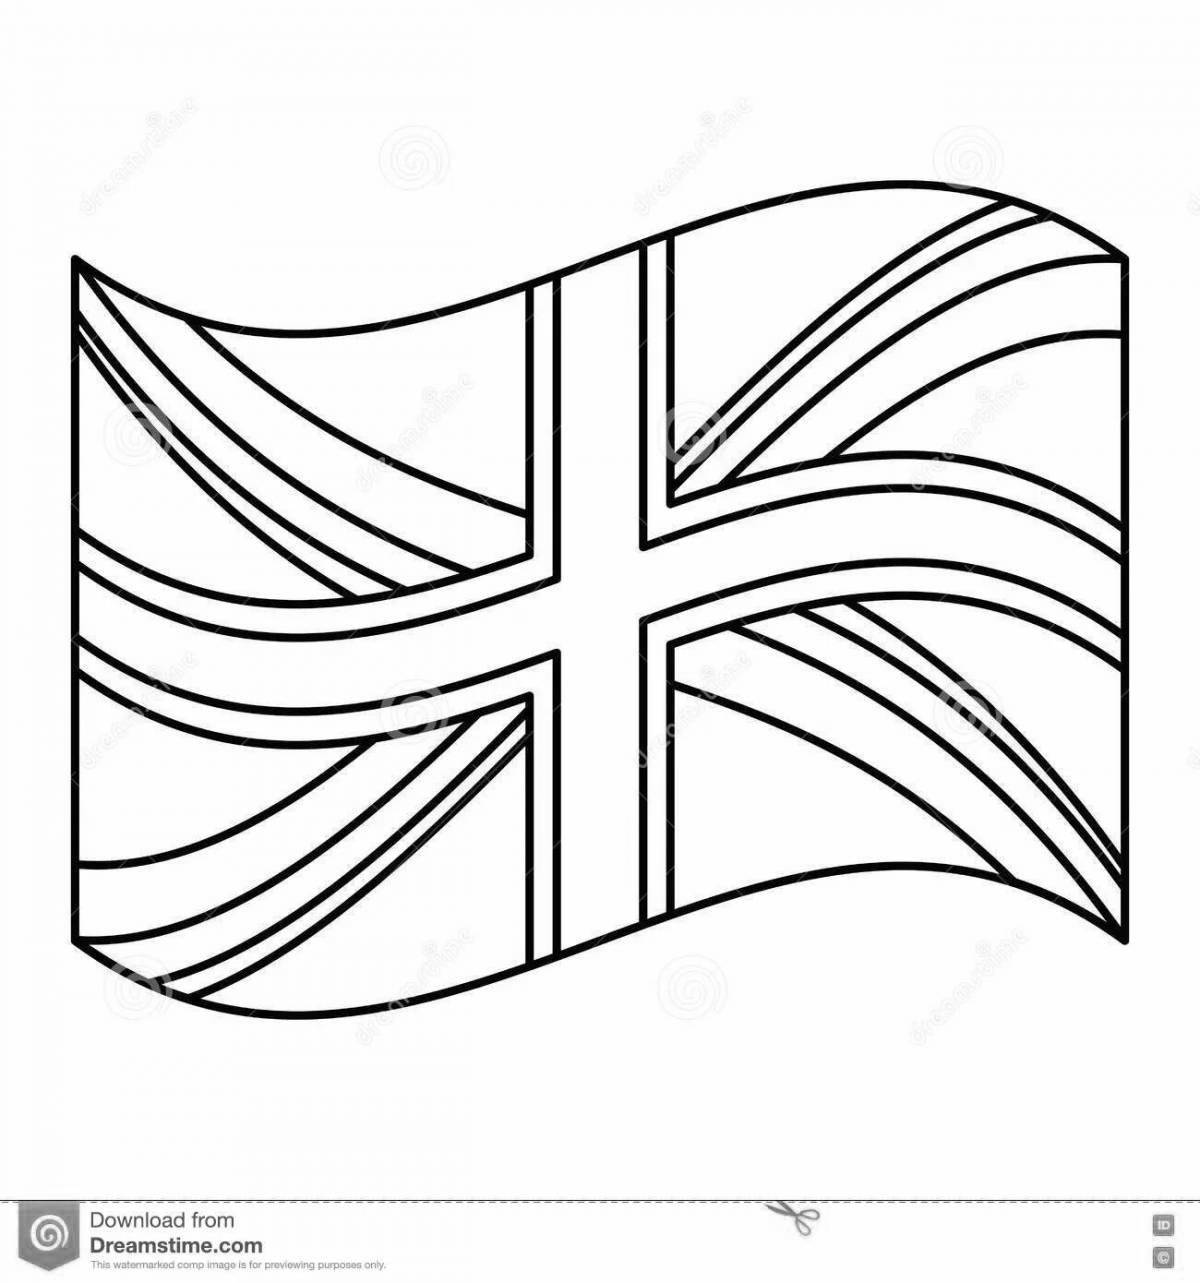 Bright English flag coloring page